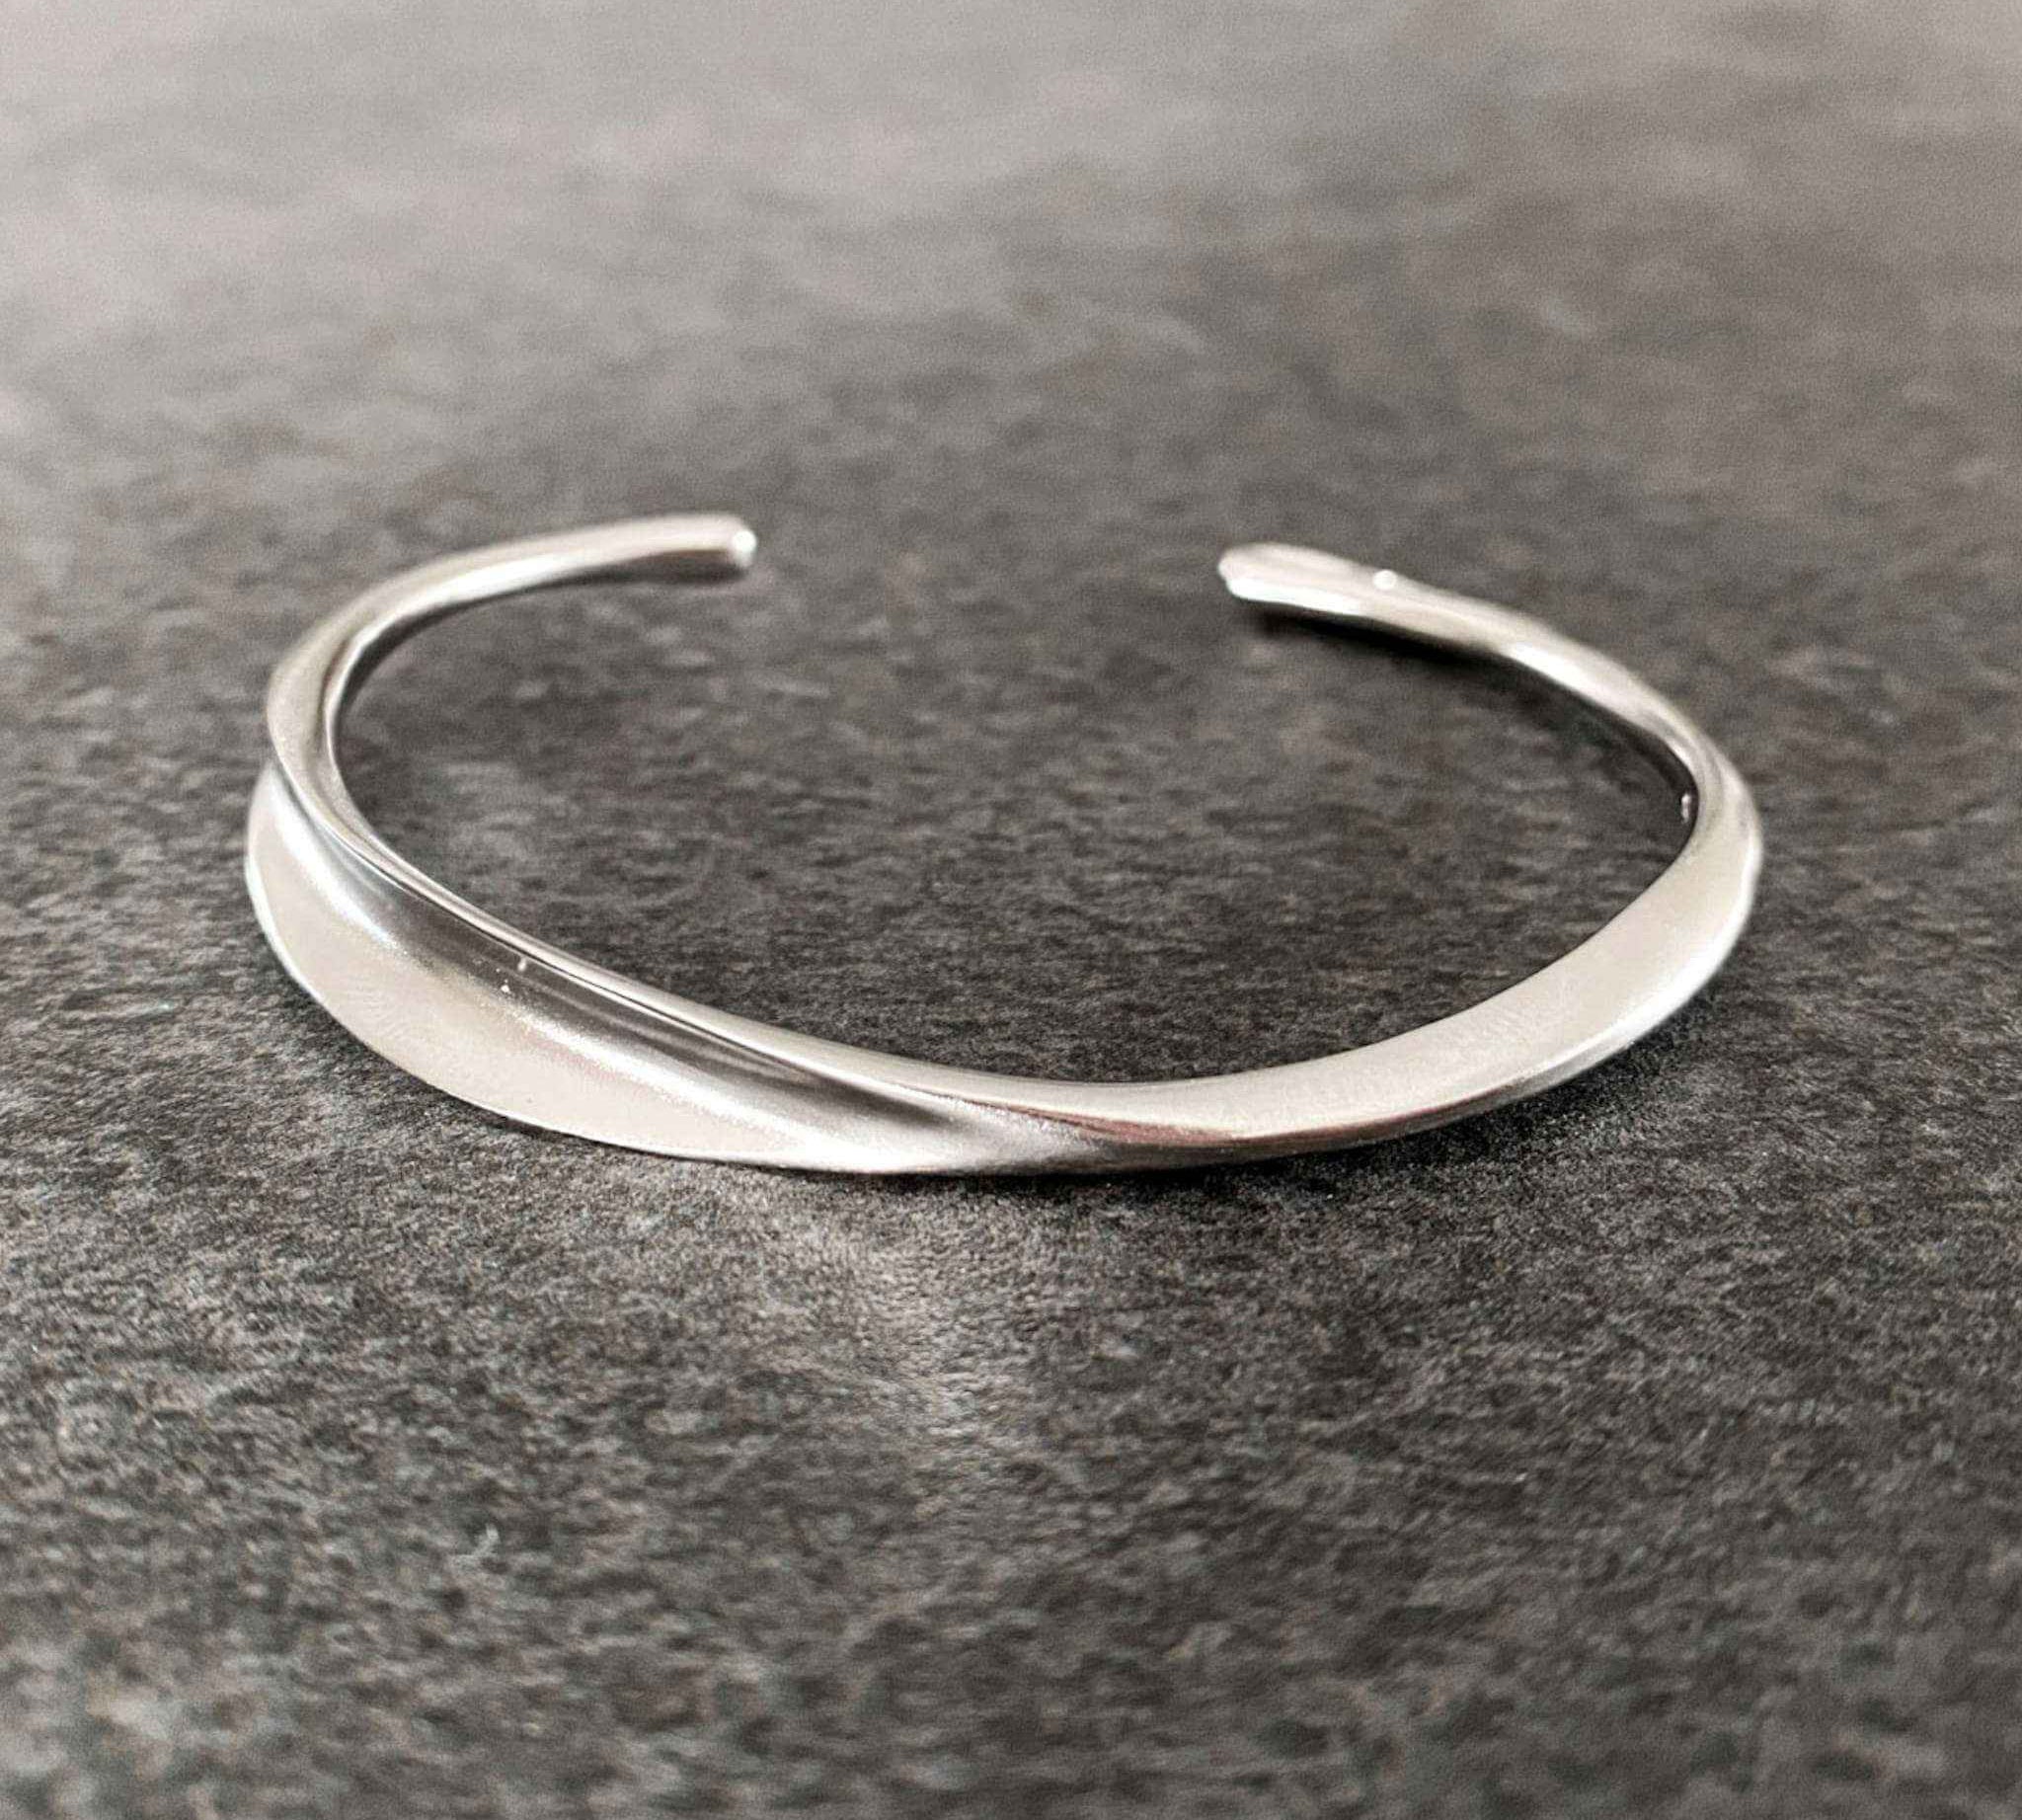 Close-up of Sterling Silver Wave Bracelet - Chic Accessory for Women by Alessandra James.